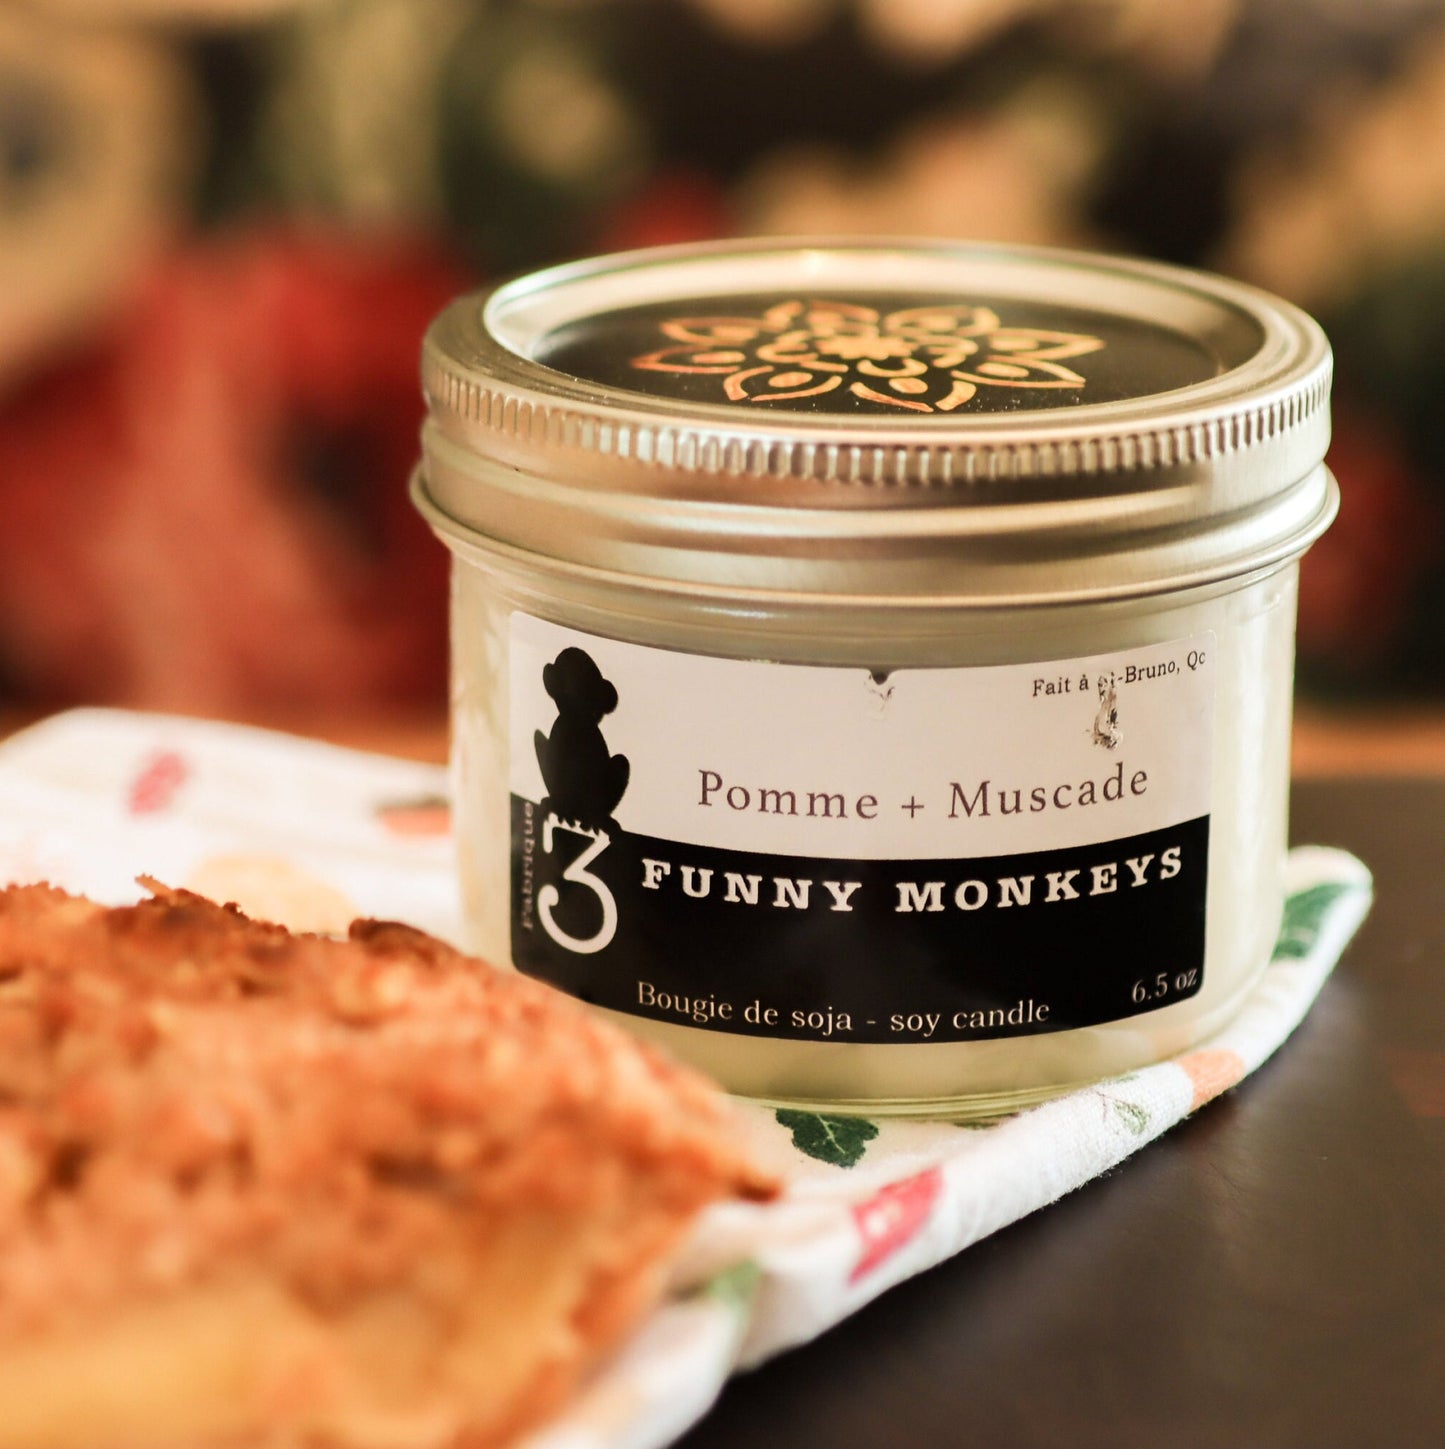 Apple pie, soy candle